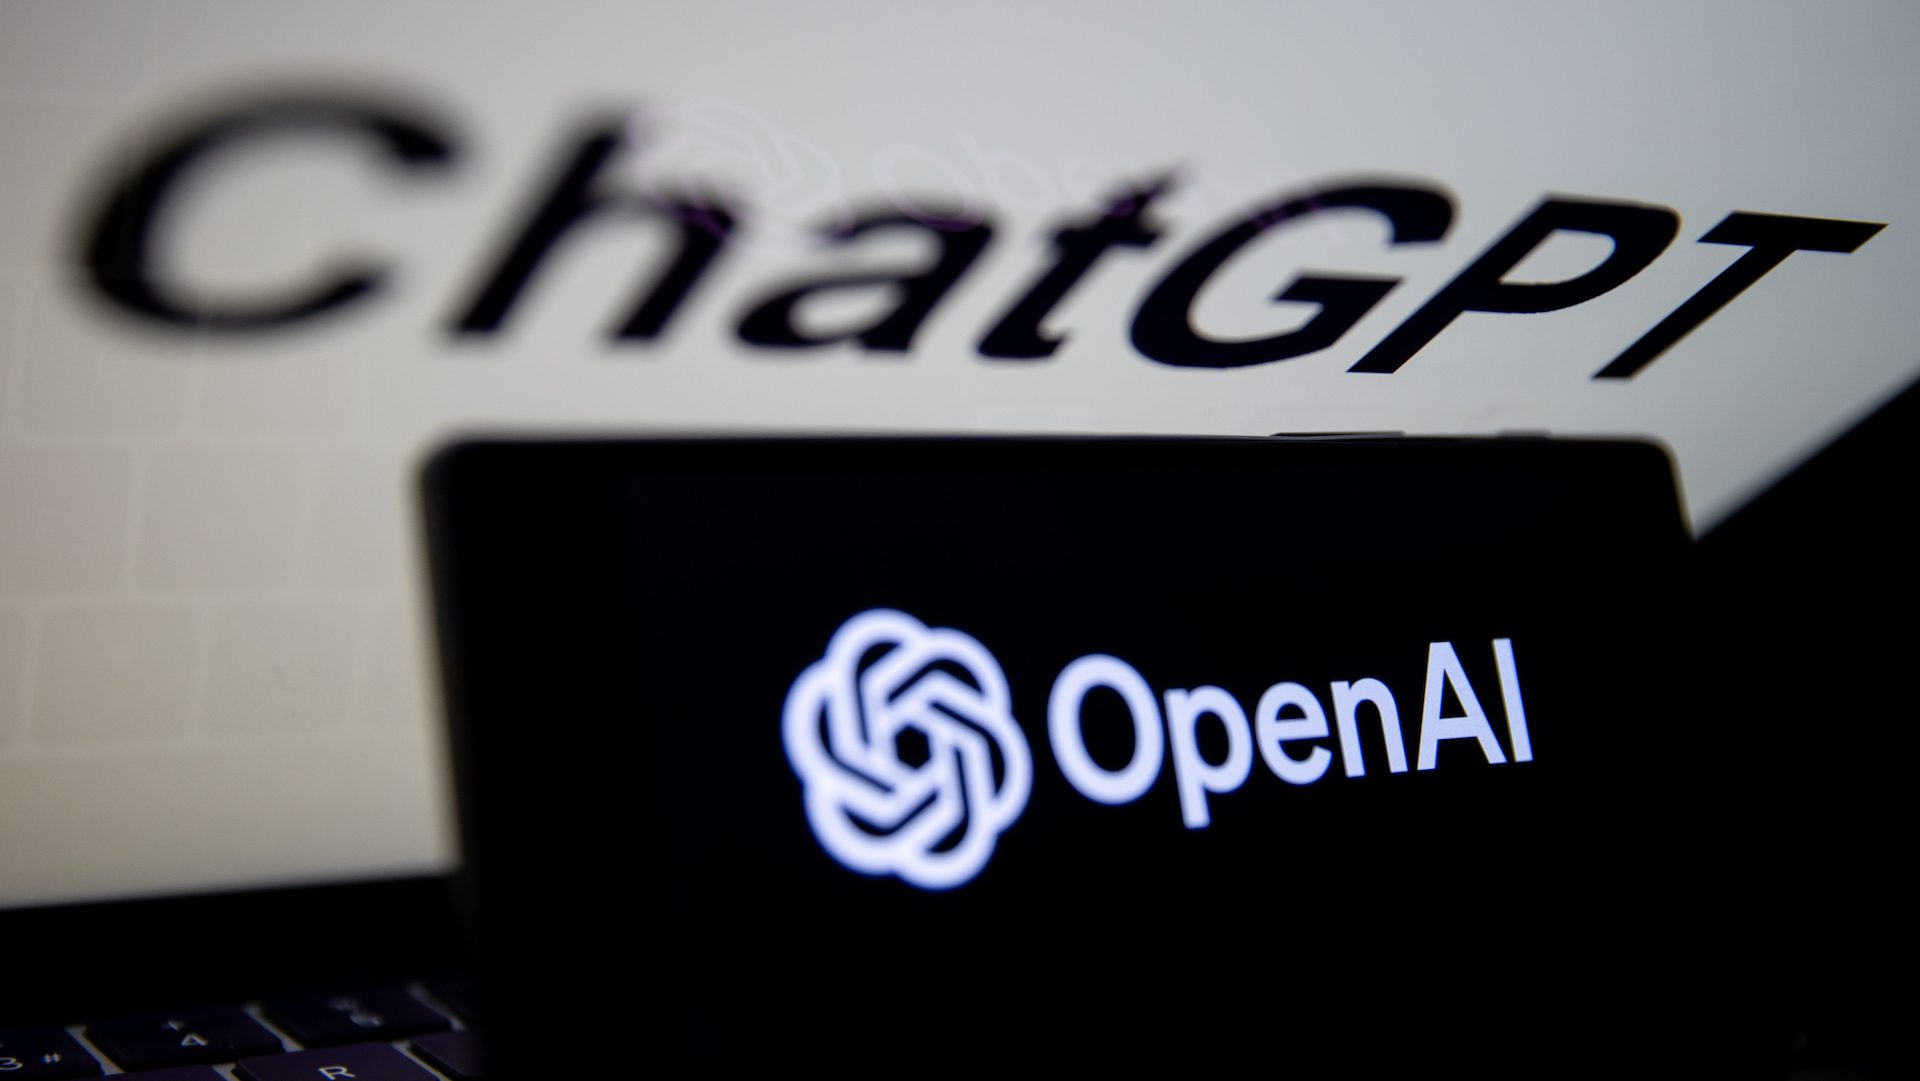 The OpenAI logo is displayed on the mobile phone screen in front of the computer screen with the ChatGPT logo